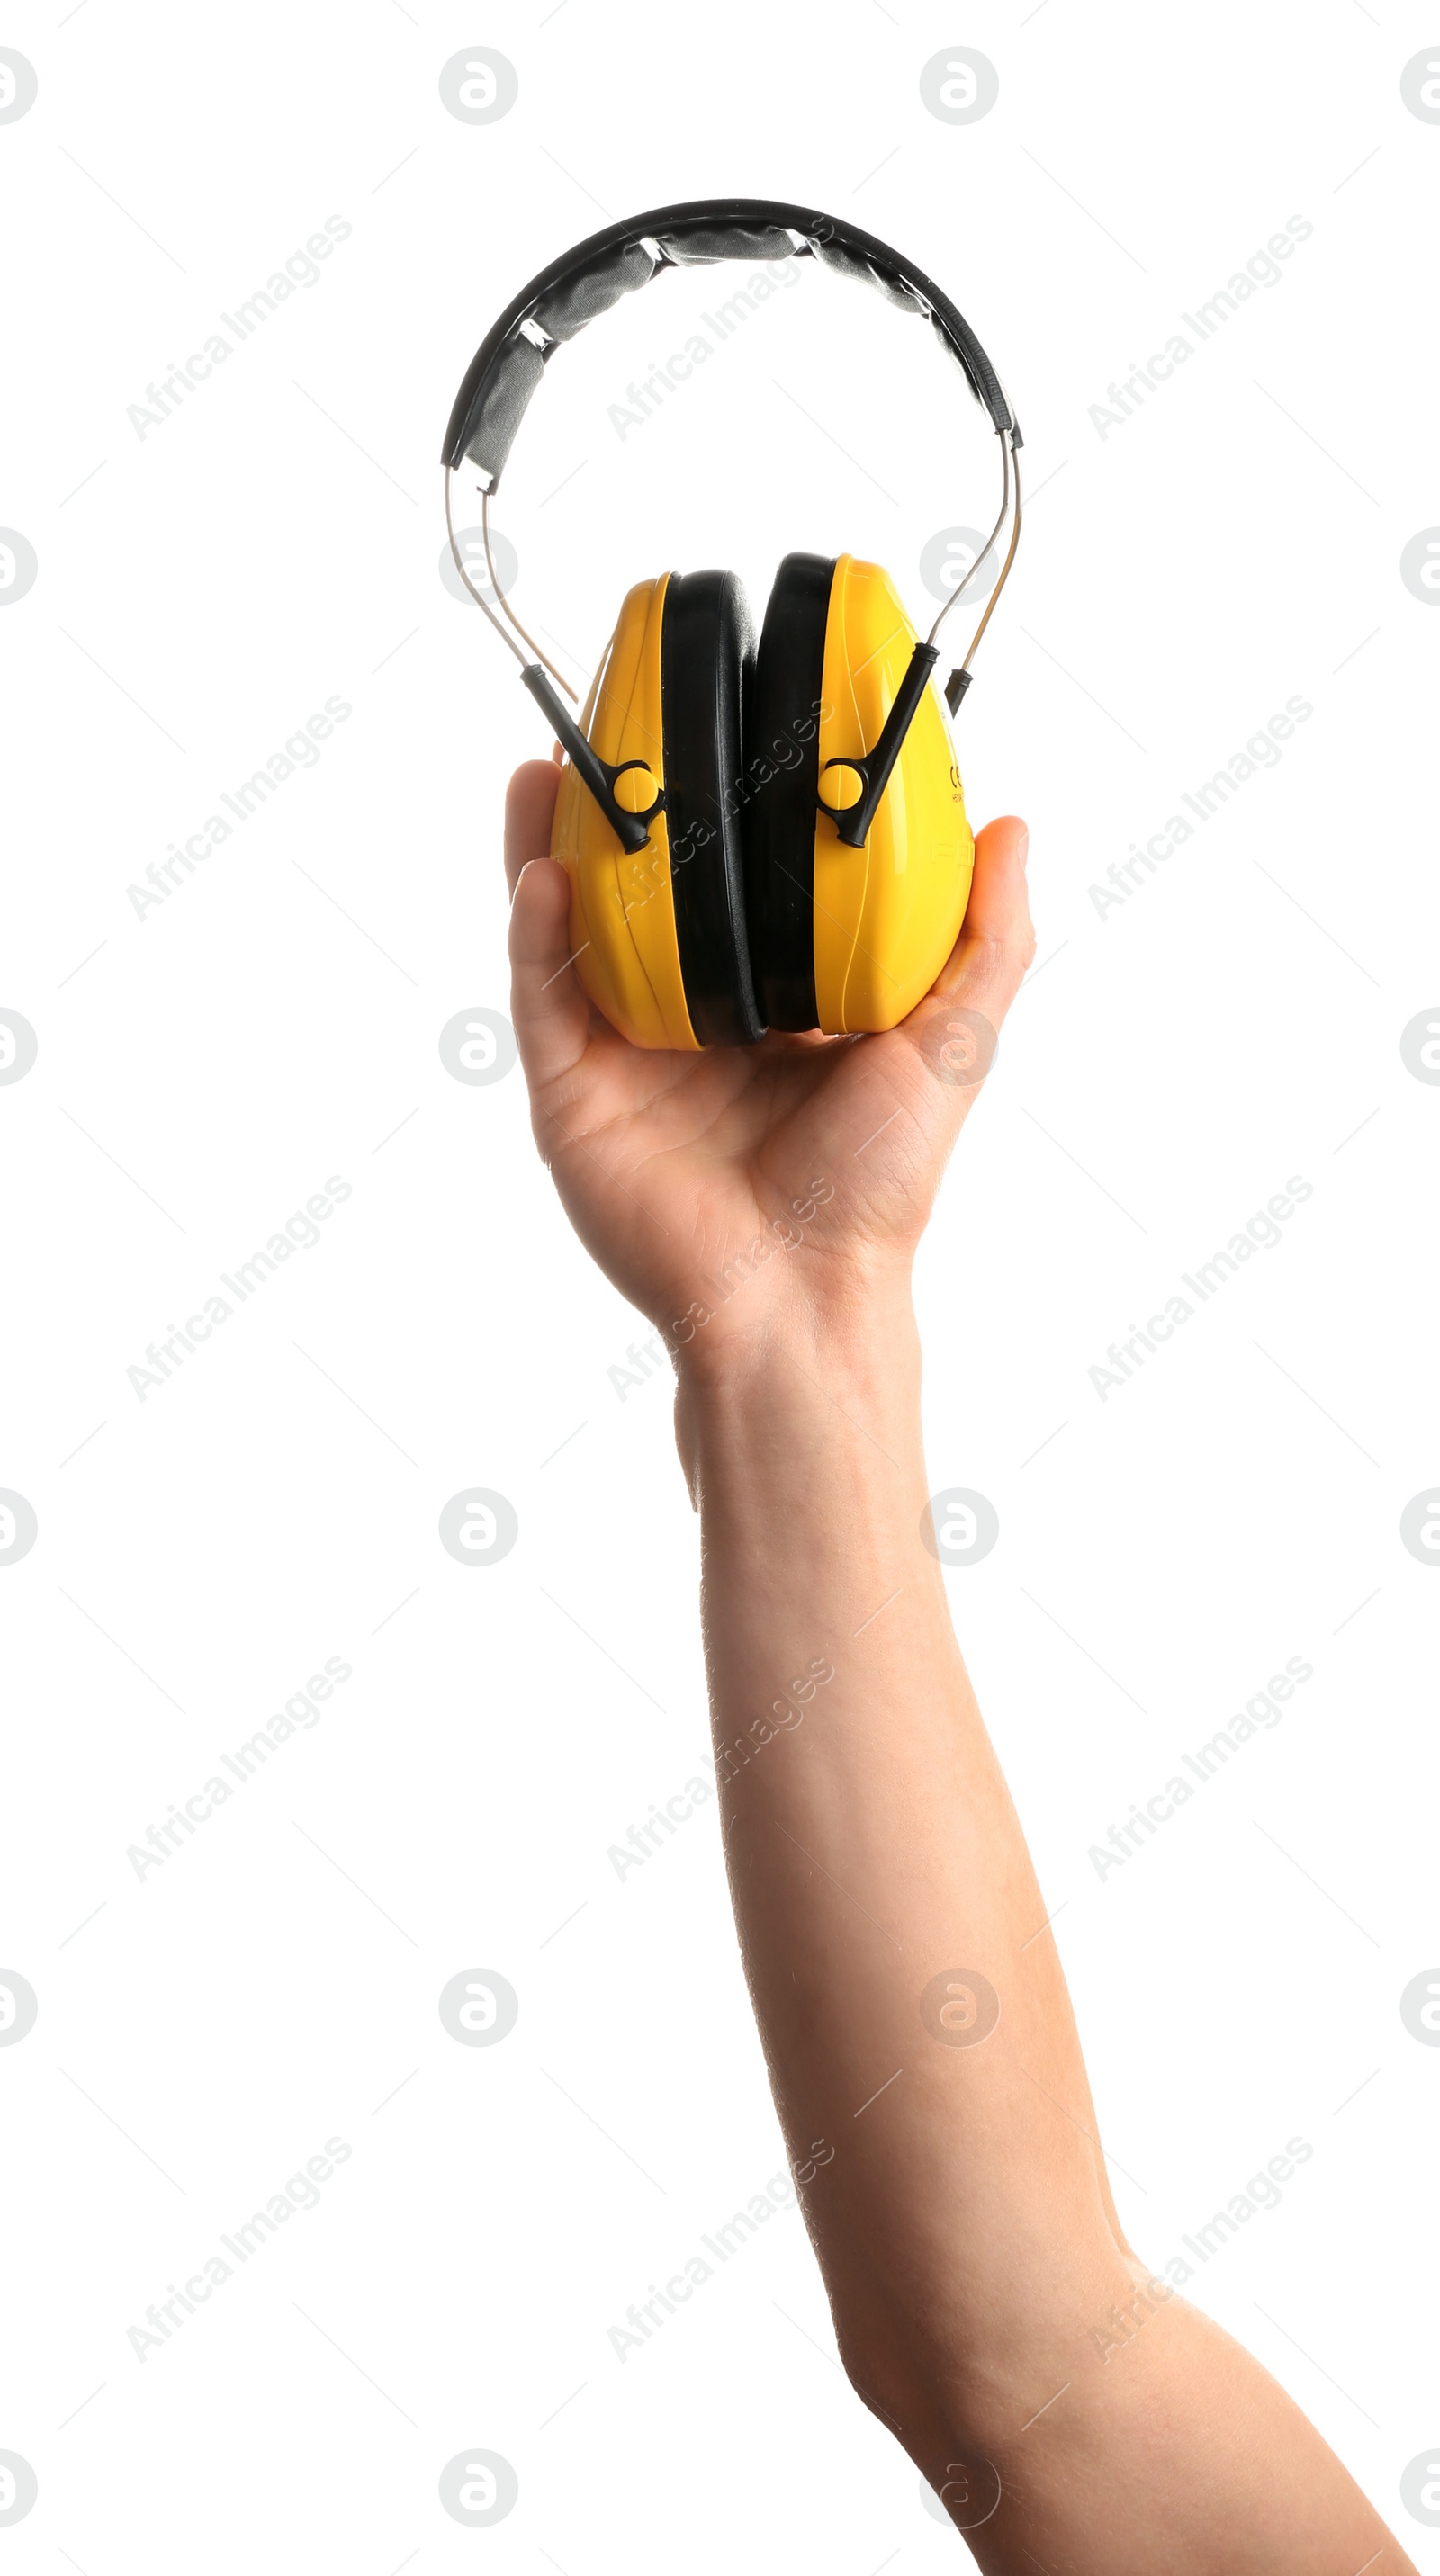 Photo of Construction worker holding safety headphones isolated on white